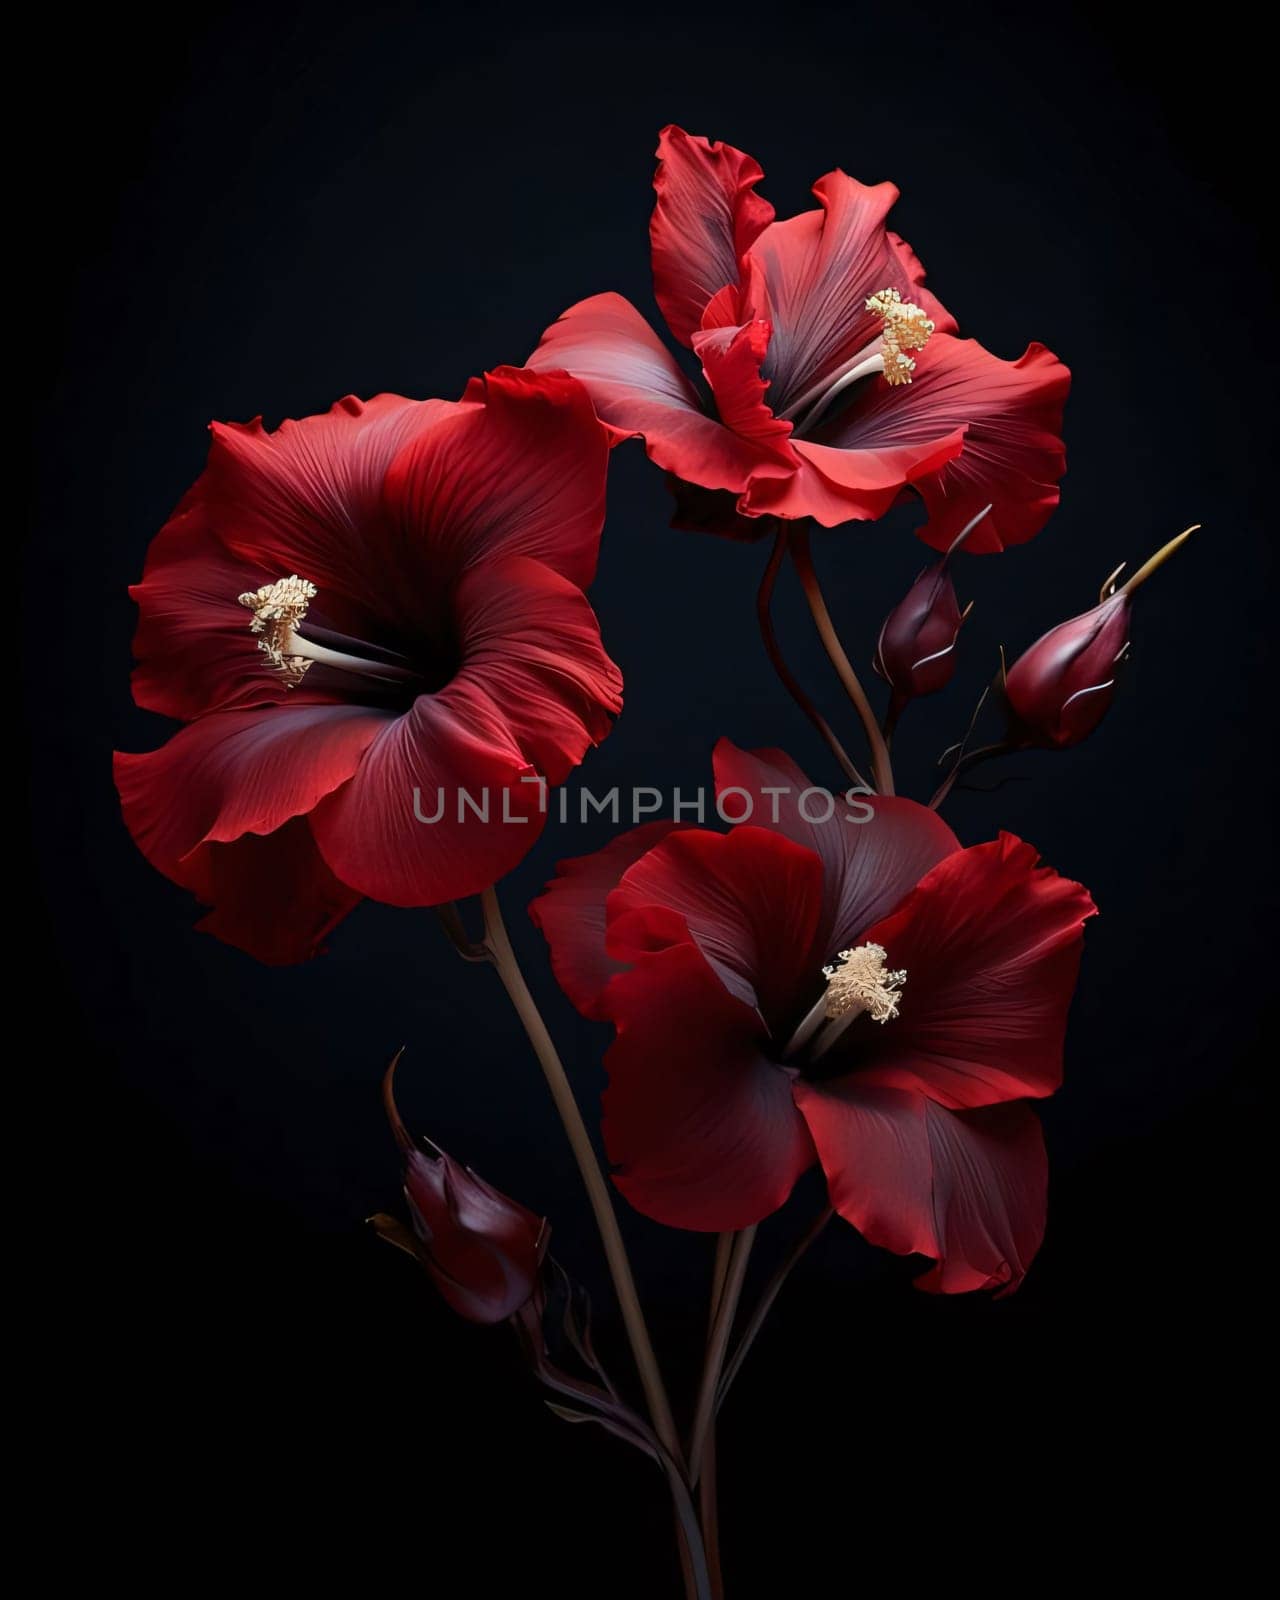 Red hibiscus flower isolated on dark black background. Flowering flowers, a symbol of spring, new life. A joyful time of nature waking up to life.